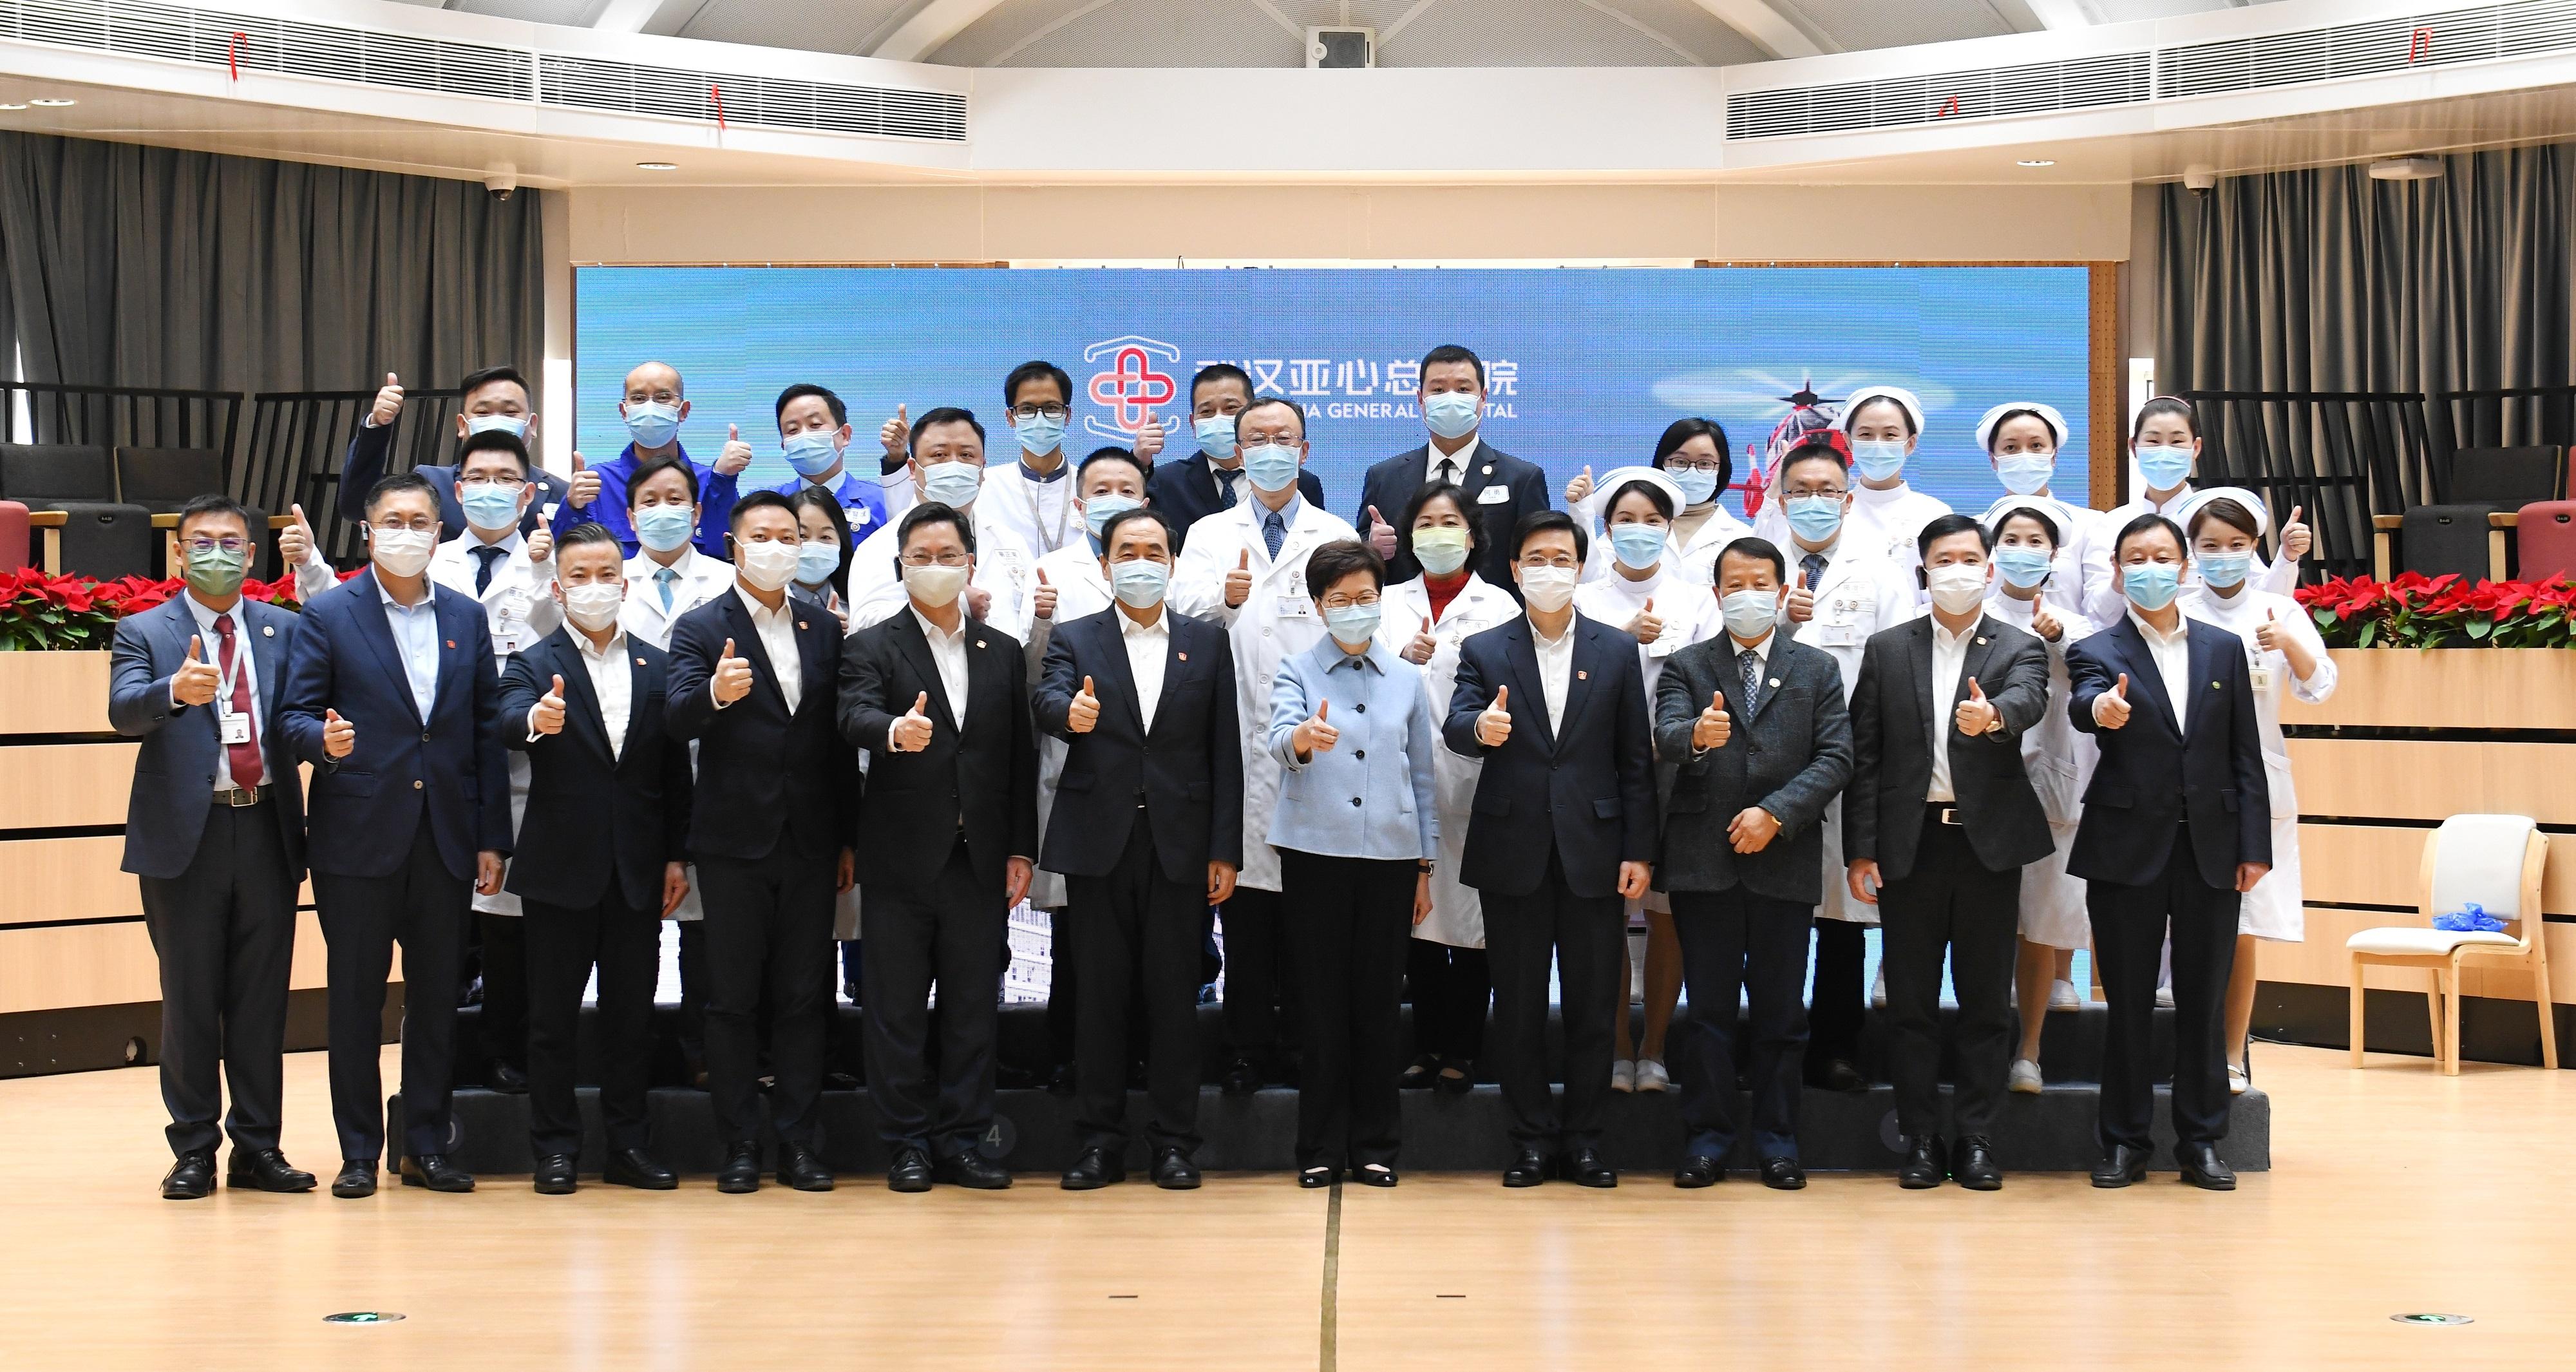 The Chief Executive, Mrs Carrie Lam, visited Wuhan Asia General Hospital, a Hong Kong enterprise, in Wuhan today (November 29). Mrs Lam (front row, fifth right) is pictured with Vice Governor of Hubei Province Mr Zhao Haishan (front row, sixth left); the Chief Secretary for Administration, Mr John Lee (front row, fourth right); the Secretary for Innovation and Technology, Mr Alfred Sit (front row, fifth left); the Secretary for Home Affairs, Mr Caspar Tsui (front row, fourth left); the Under Secretary for Constitutional and Mainland Affairs, Mr Clement Woo (front row, second right); the Chairman of Hong Kong Asia Medical Group, Mr Tse Chun-ming (front row, third right); the general manager of Wuhan Asia General Hospital, Mr Steven Tse  (front row, first left); the director of Wuhan Asia General Hospital, Professor Su Xi (second row, sixth right); and medical staff and other guests.